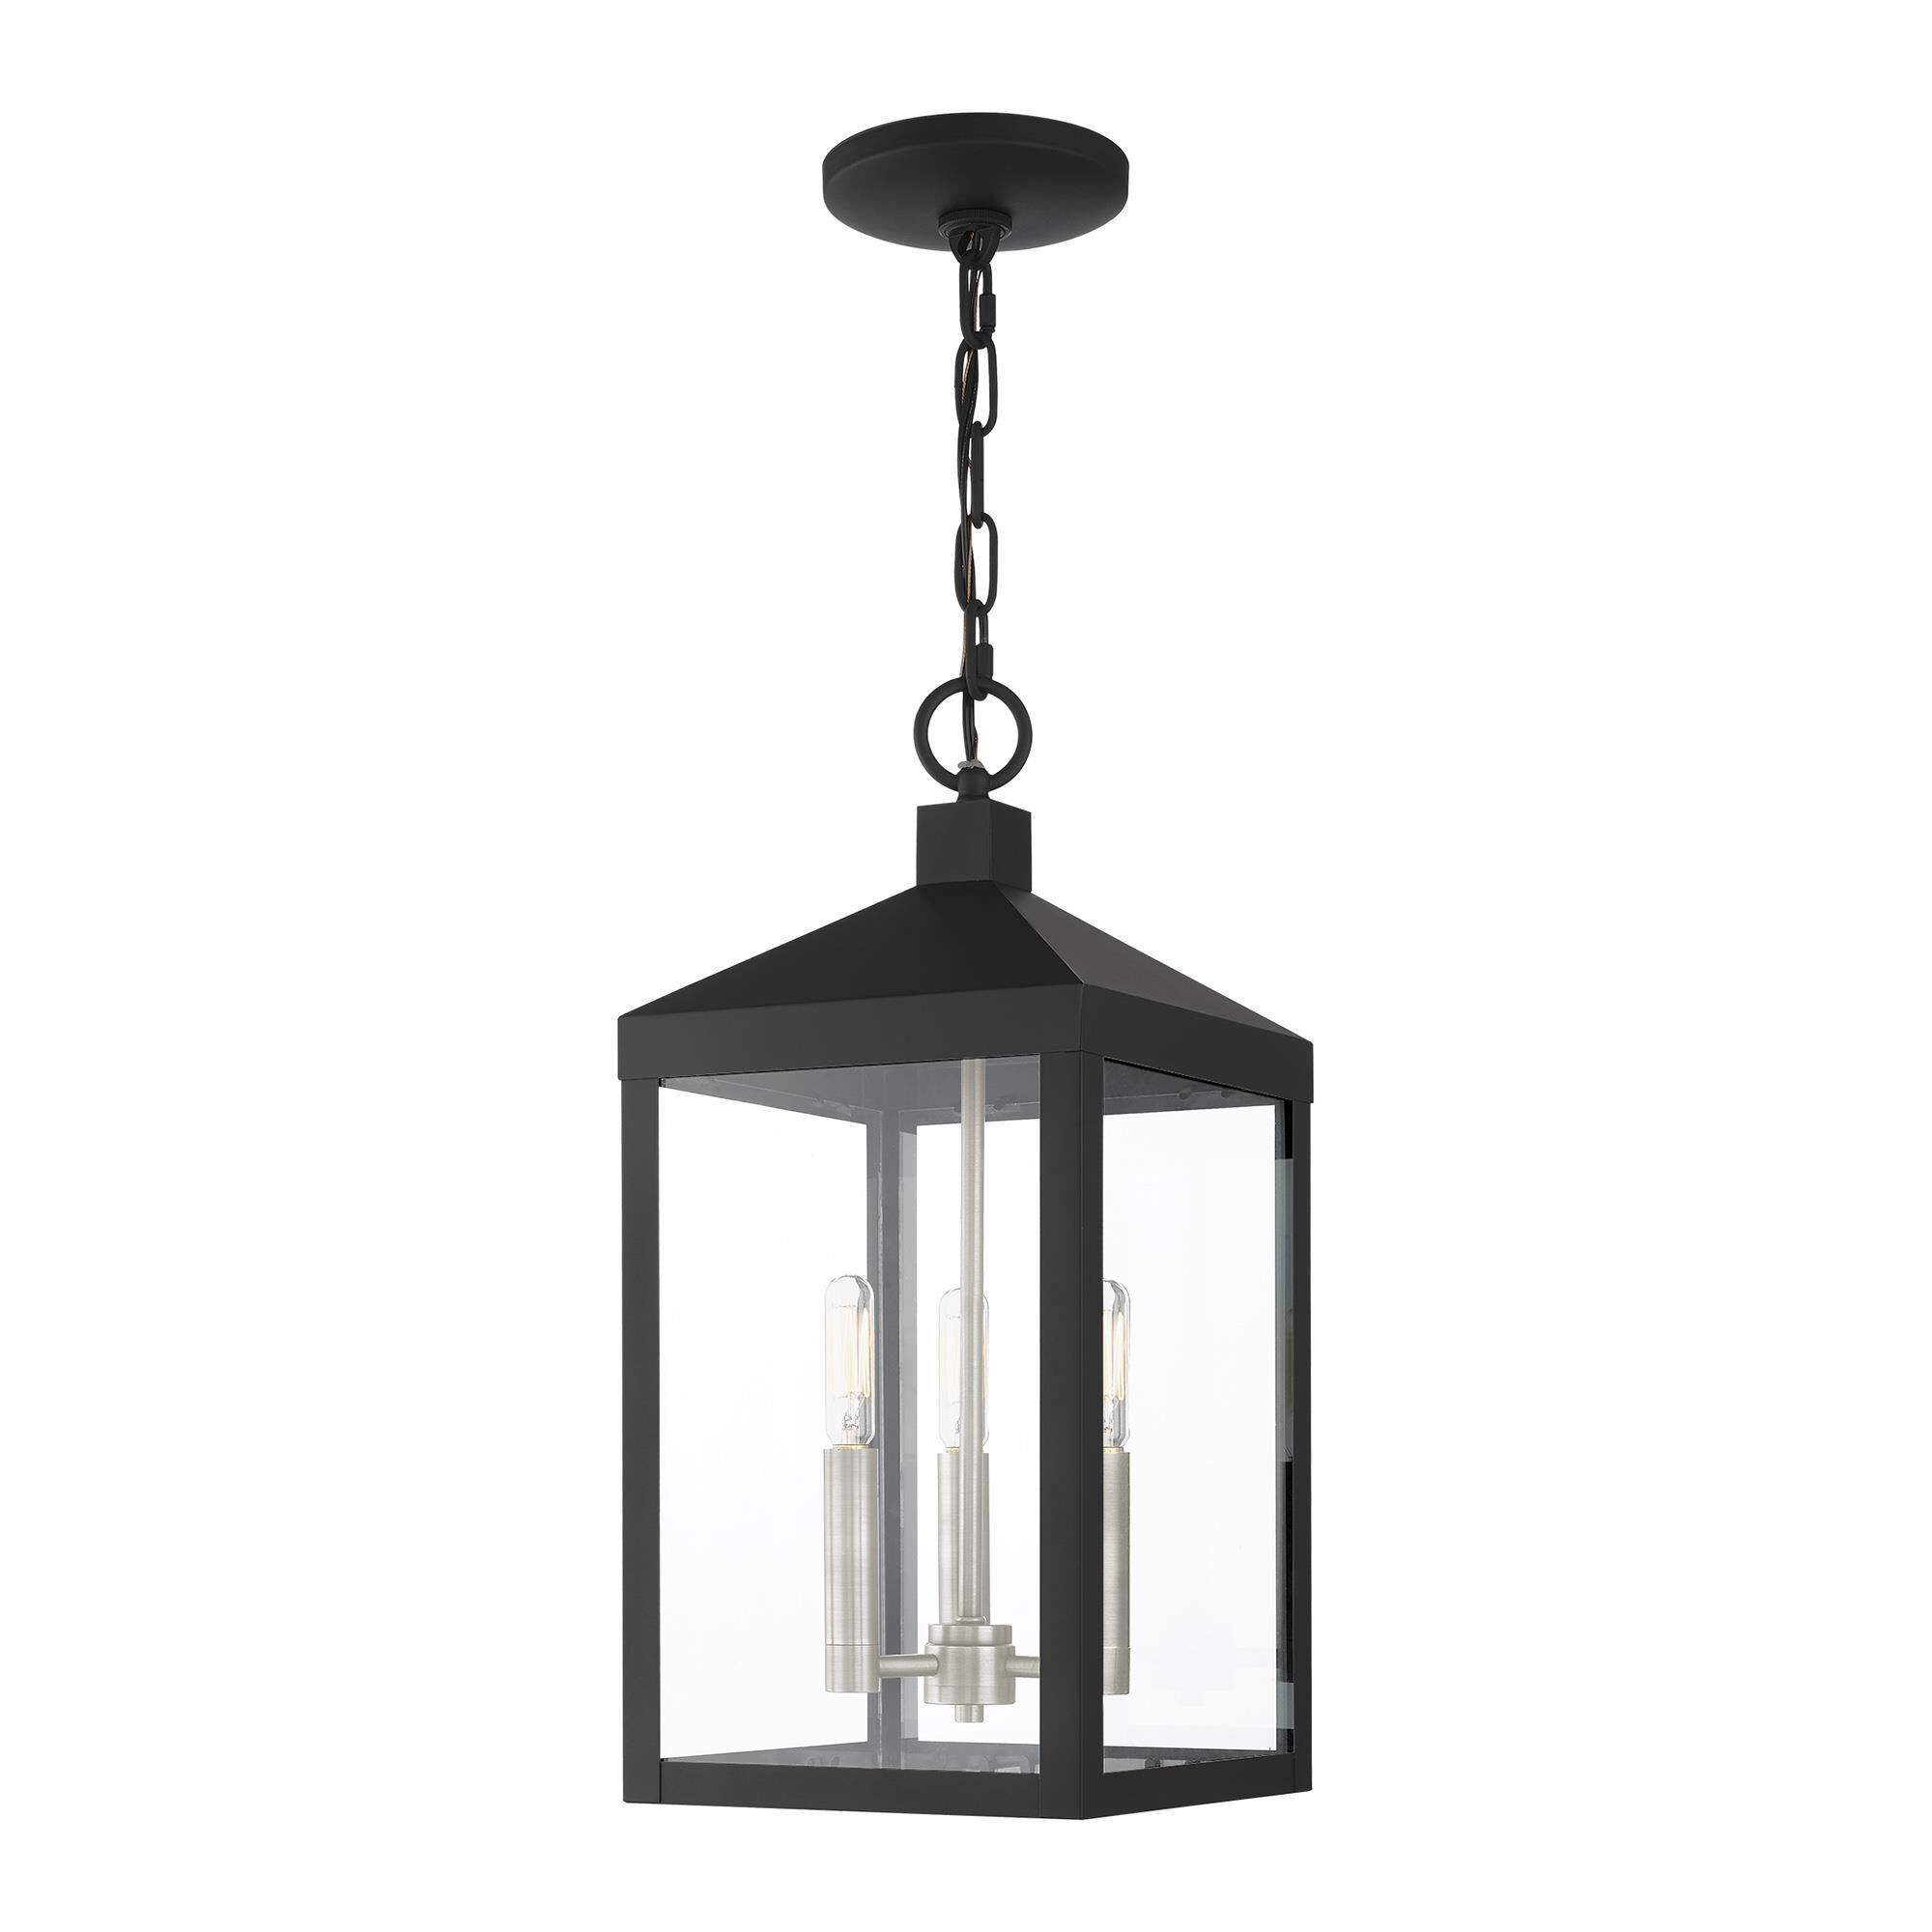 Nyack 18 Inch Tall 3 Light Outdoor Hanging Lantern | Capitol Lighting | Lantern  Pendant Lighting, Outdoor Hanging Lanterns, Outdoor Pendant Lighting In 18 Inch Lantern Chandeliers (View 1 of 15)